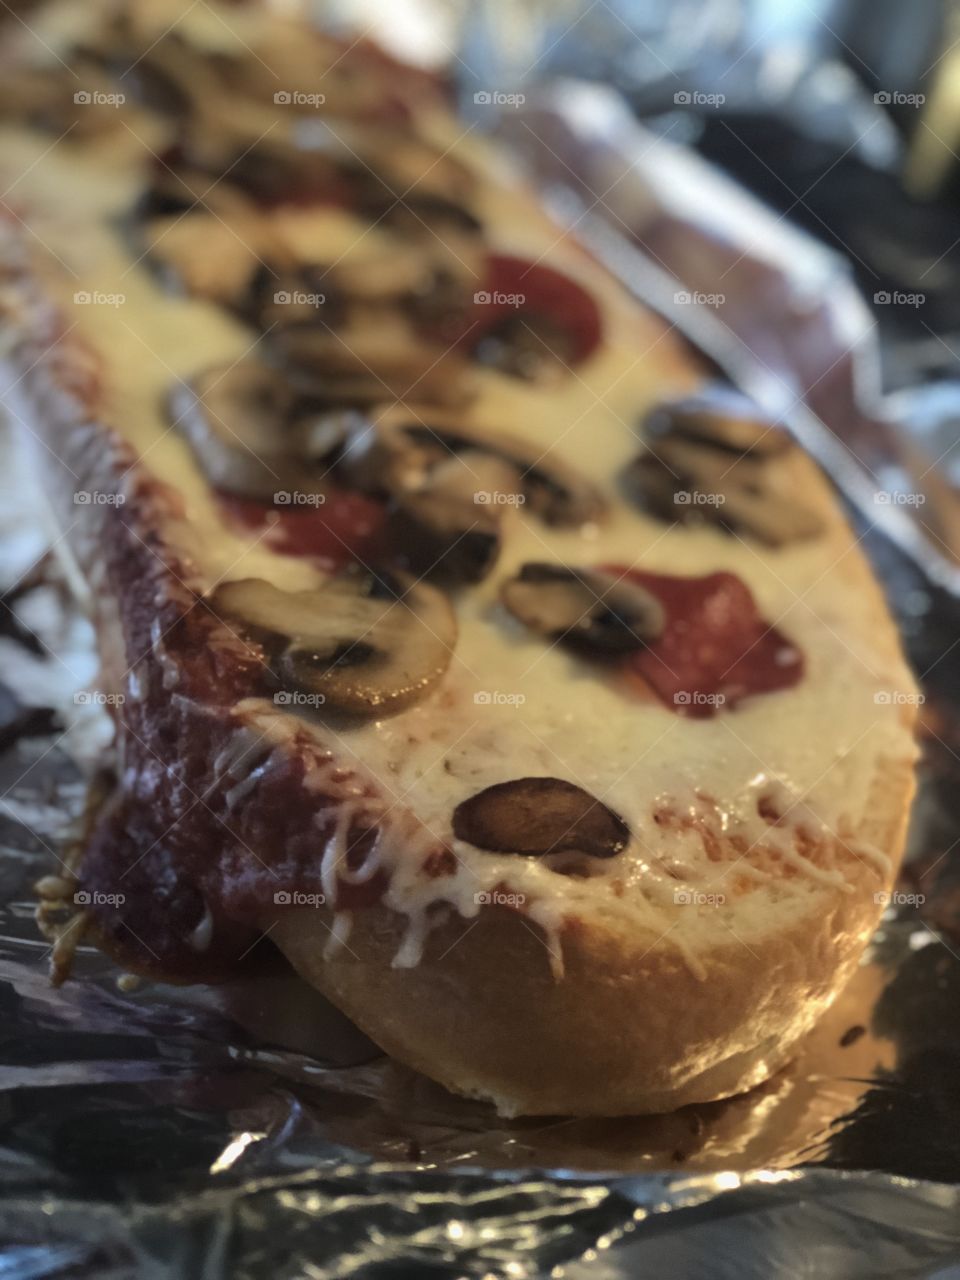 Hot out of the over french bread pizza 